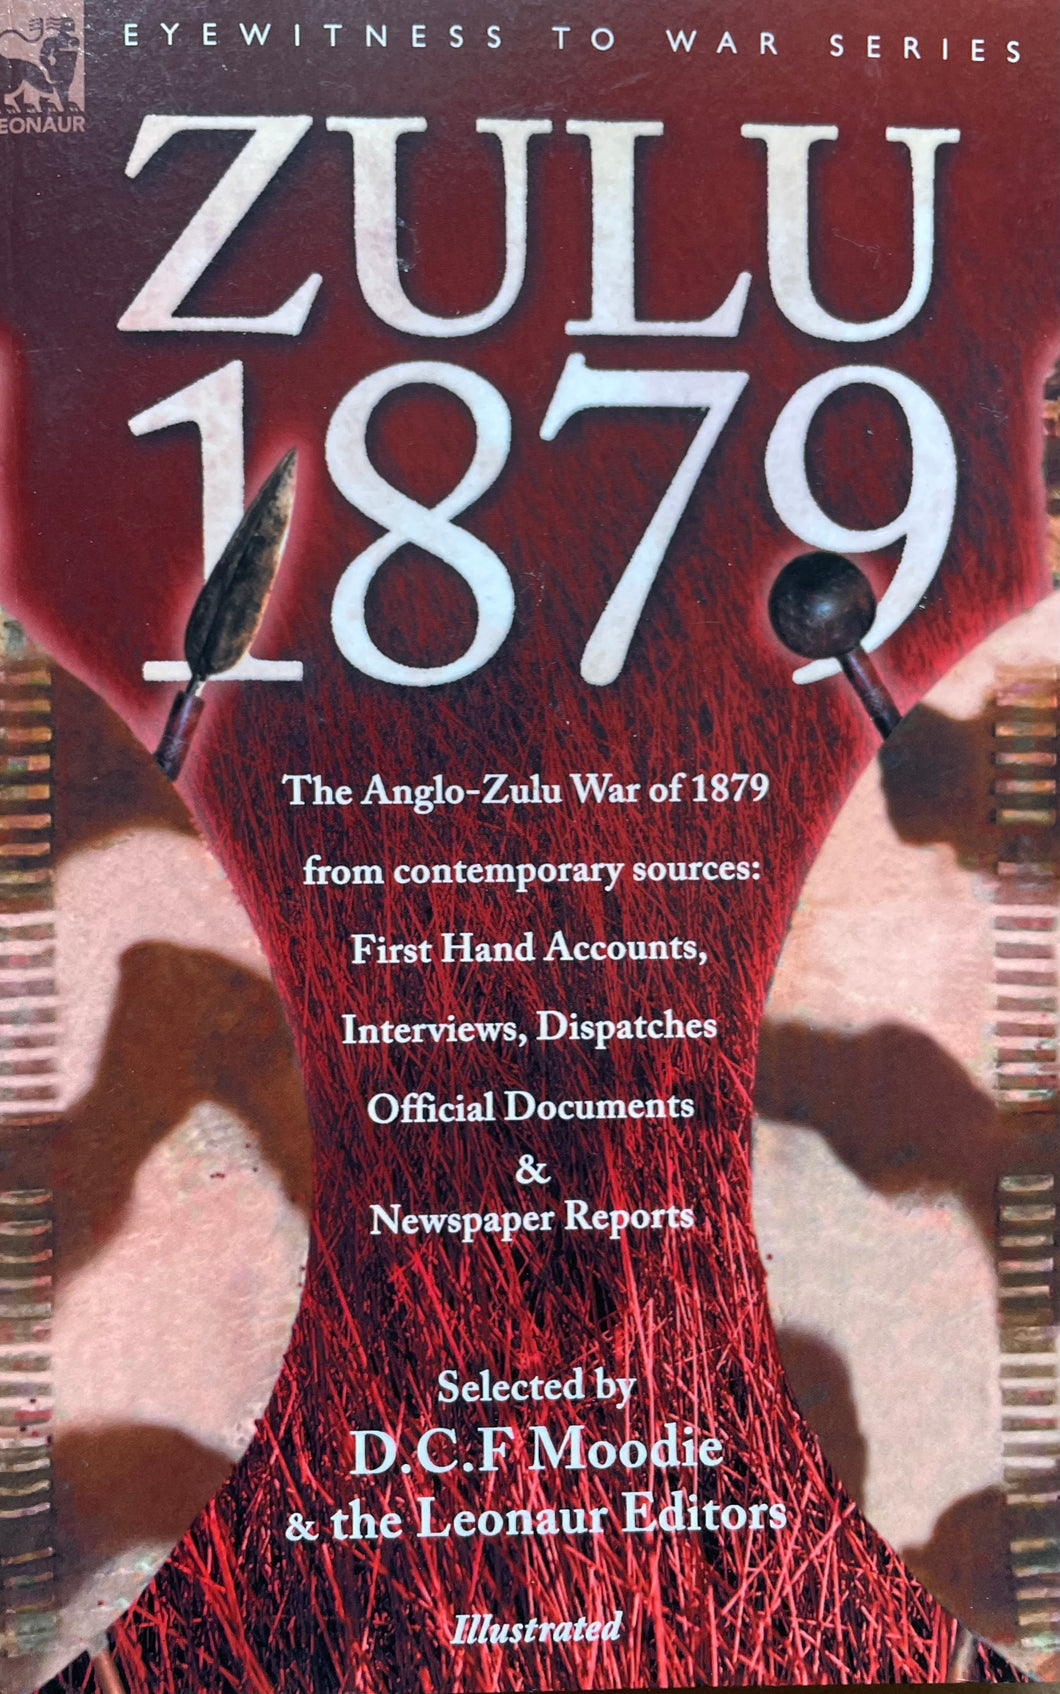 Zulu 1879: The Anglo-Zulu War of 1879 from Contemporary Sources, Selected By D.C.F. Moodie & the Leonaur Editors